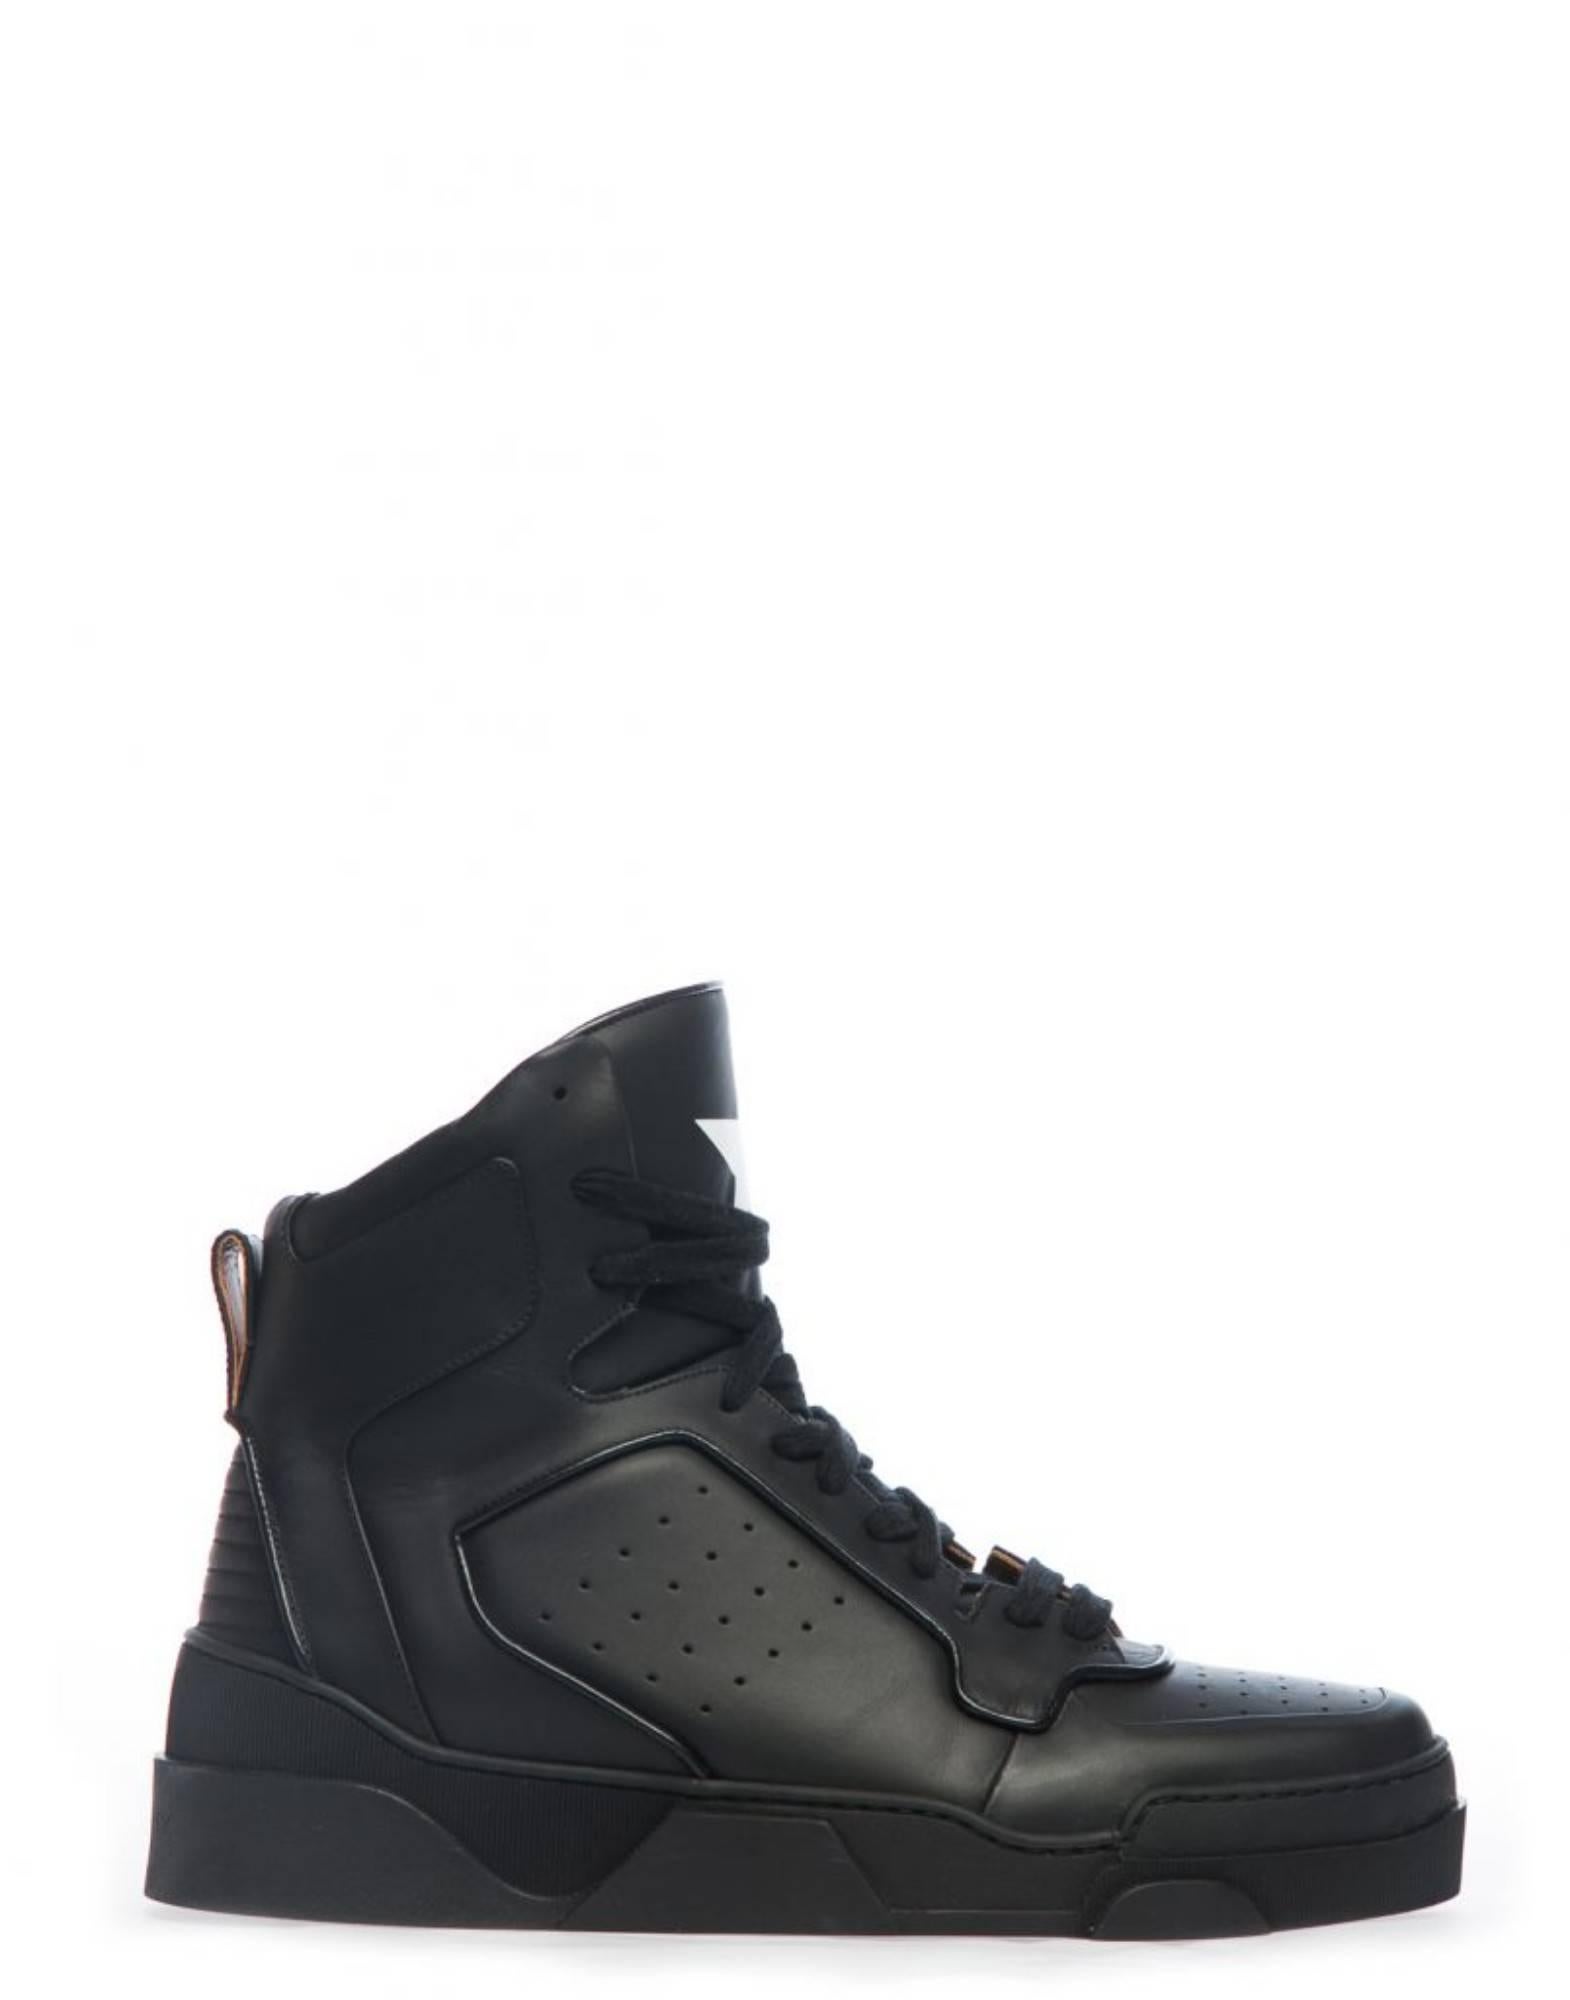 Tyson Iii Hi-Top Sneakers
Tyson III hi-top sneakers
Round toe
Lace Fastening
Leather insole
Star print on tongue
Brand logo on heel
Geometric rubber sole
Composition 100% leather